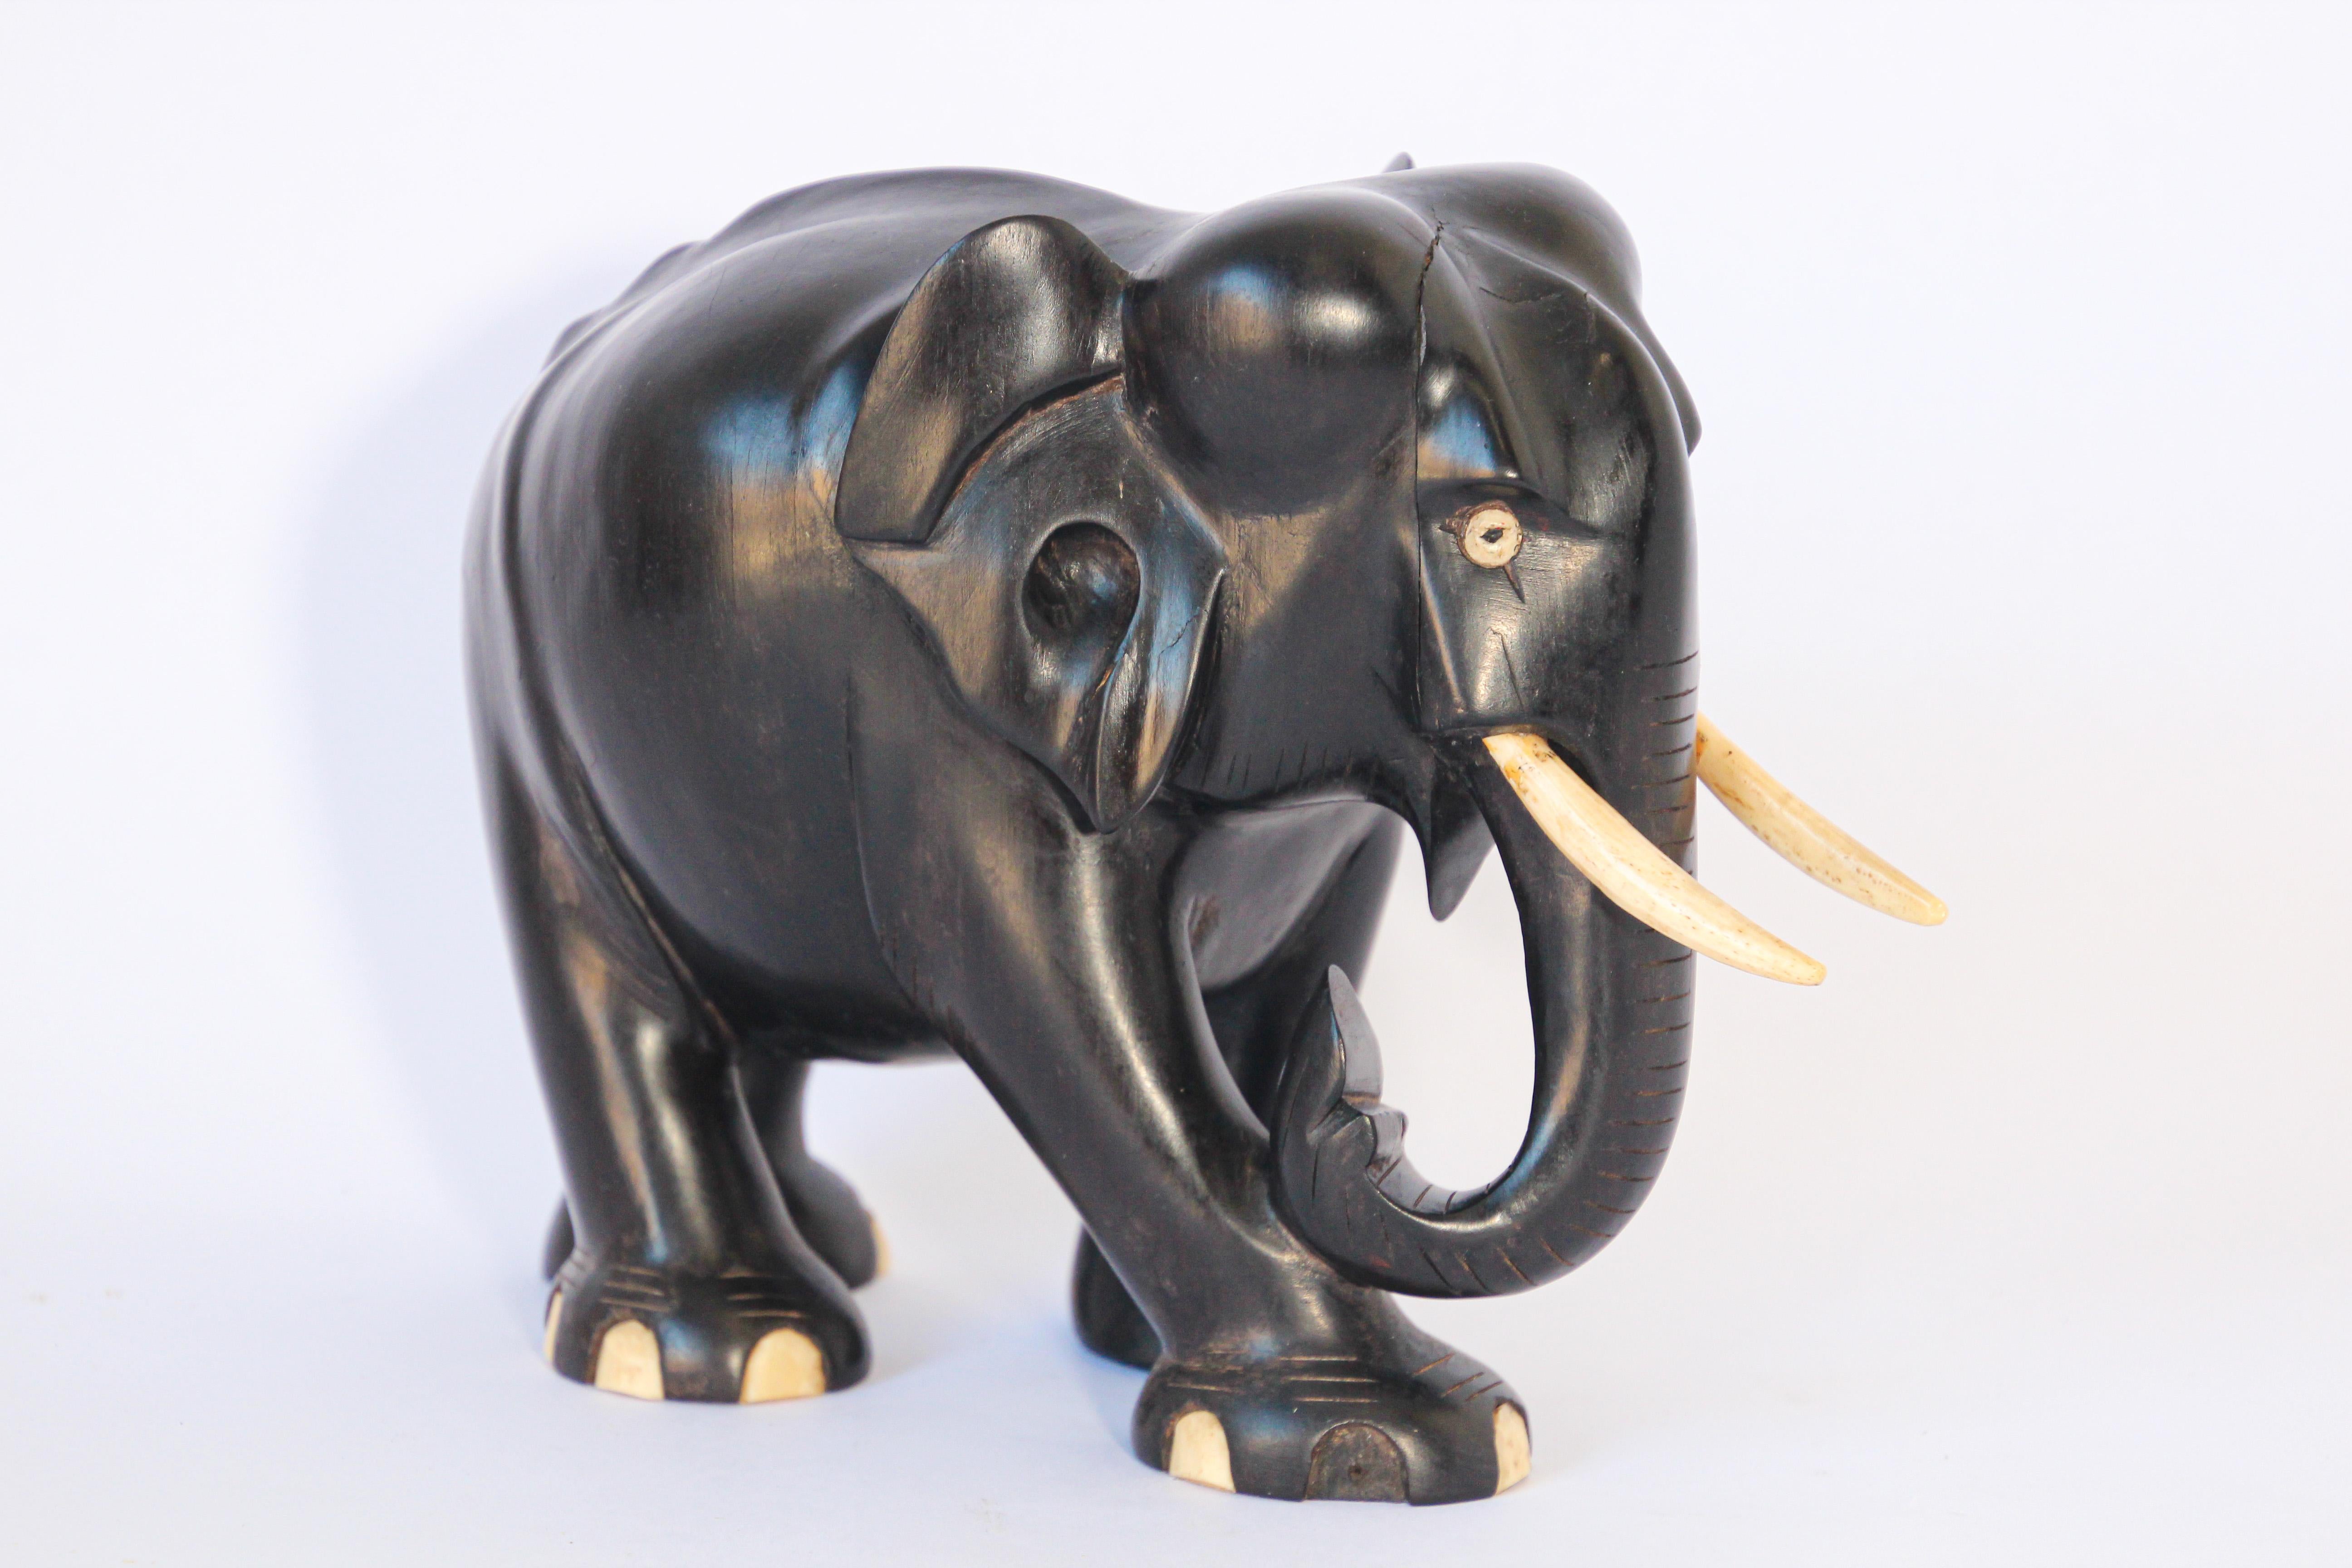 Gorgeous antique large black hand carved wood ebony Anglo-Indian elephant.
This is a large solid ebony wood vintage elephant from Ceylon Sri Lanka.
Hand carved ebony wood lucky elephant.
Art Deco style beautifully hand carved animal sculpture with